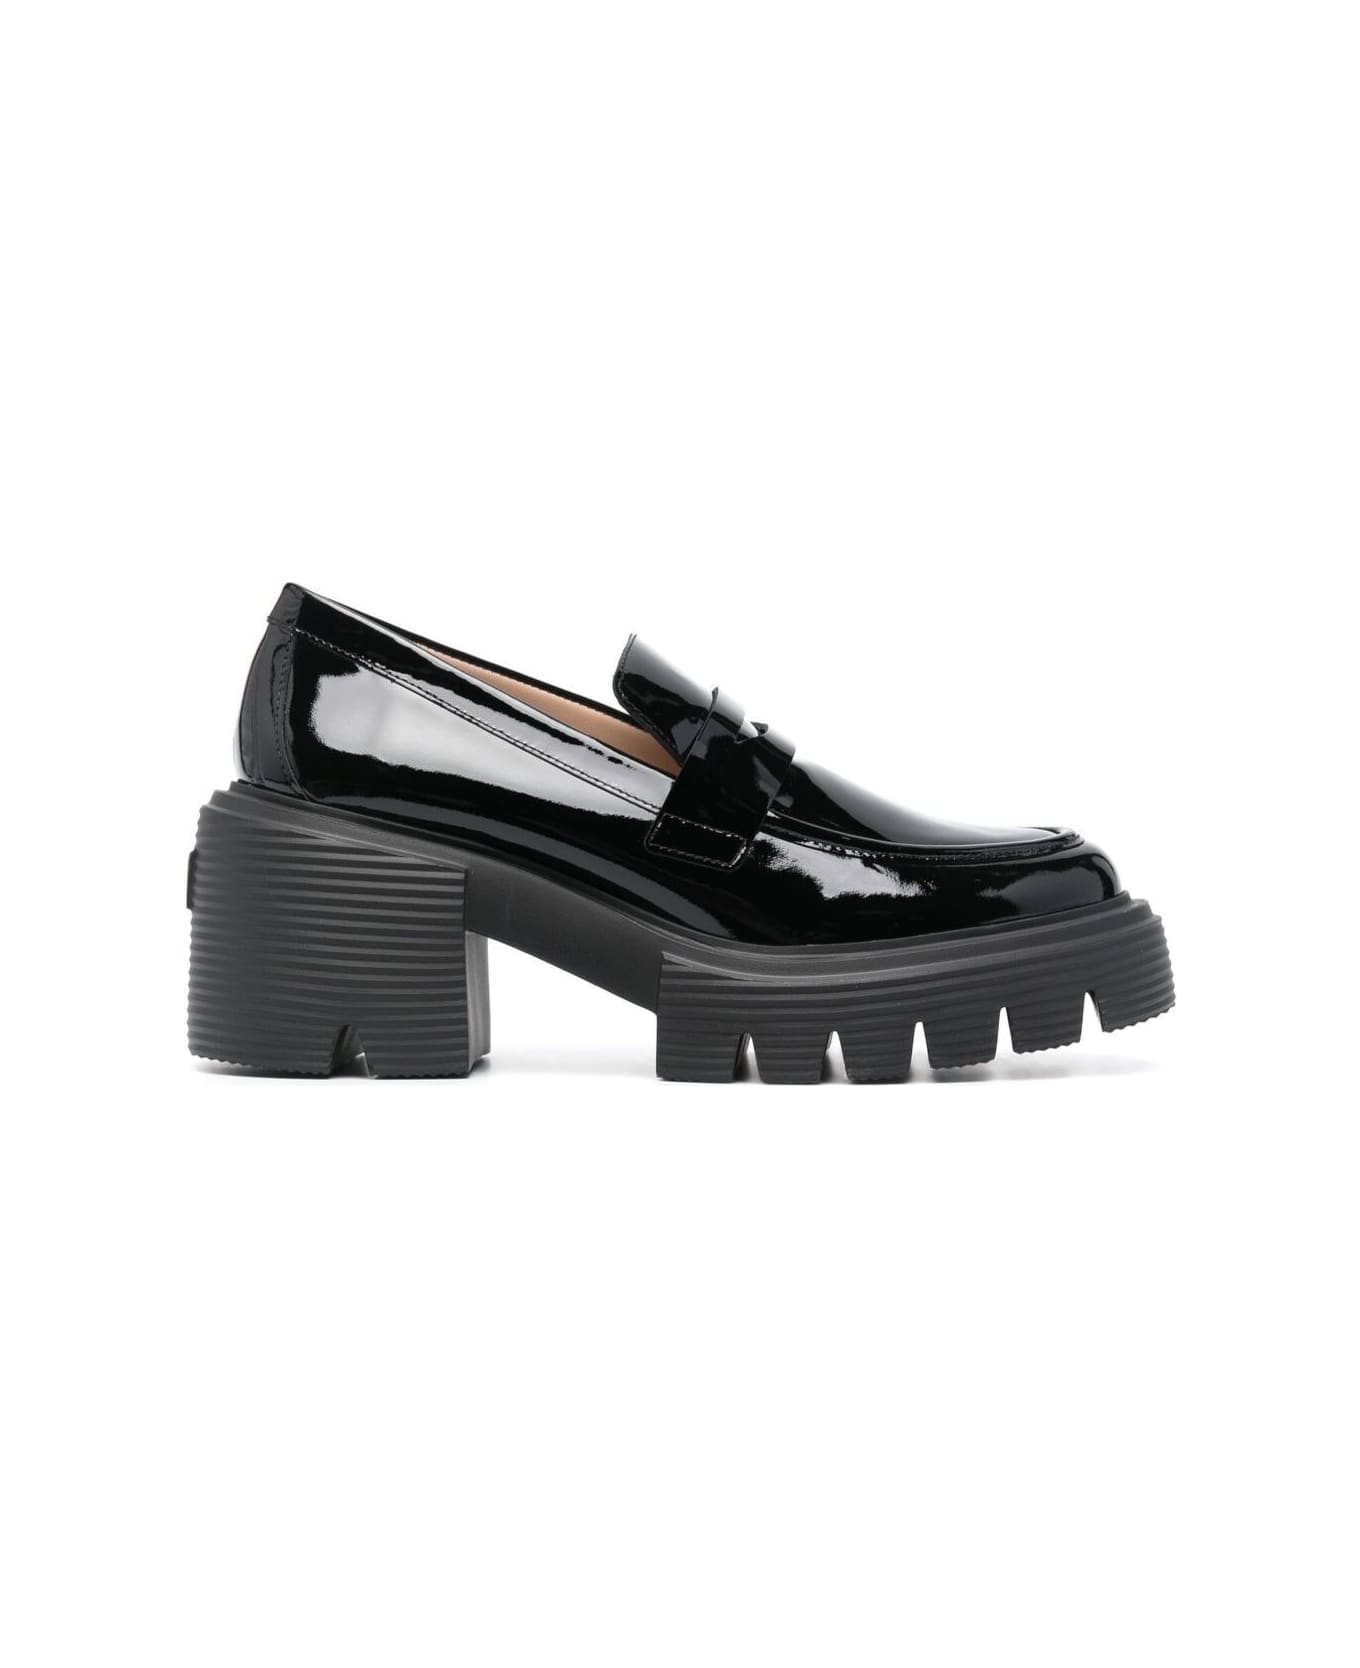 Stuart Weitzman 'soho' Black Loafers With Chunky Sole In Patent Leather Woman - Black